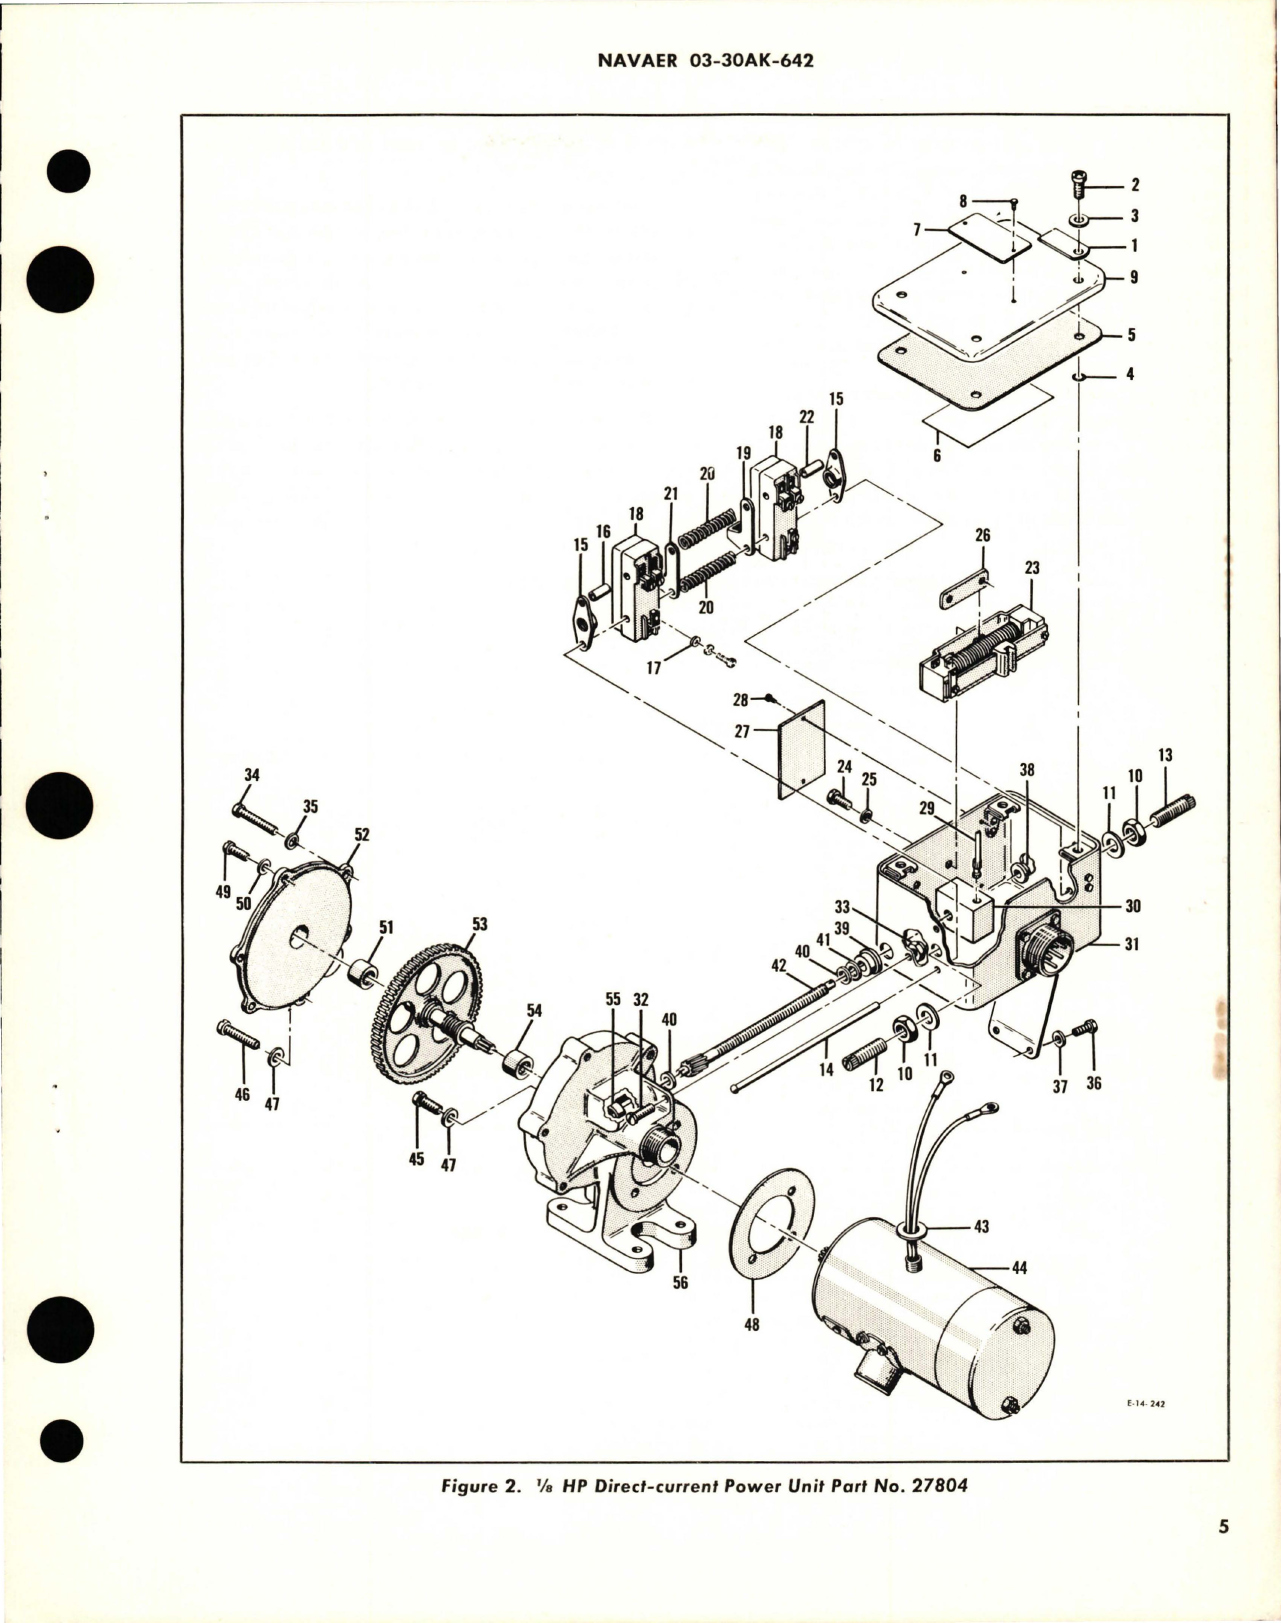 Sample page 5 from AirCorps Library document: Overhaul Instructions with Parts Breakdown for Direct Current Power Unit - 1-8 HP - Part 27804 - Model EPU2-9-1